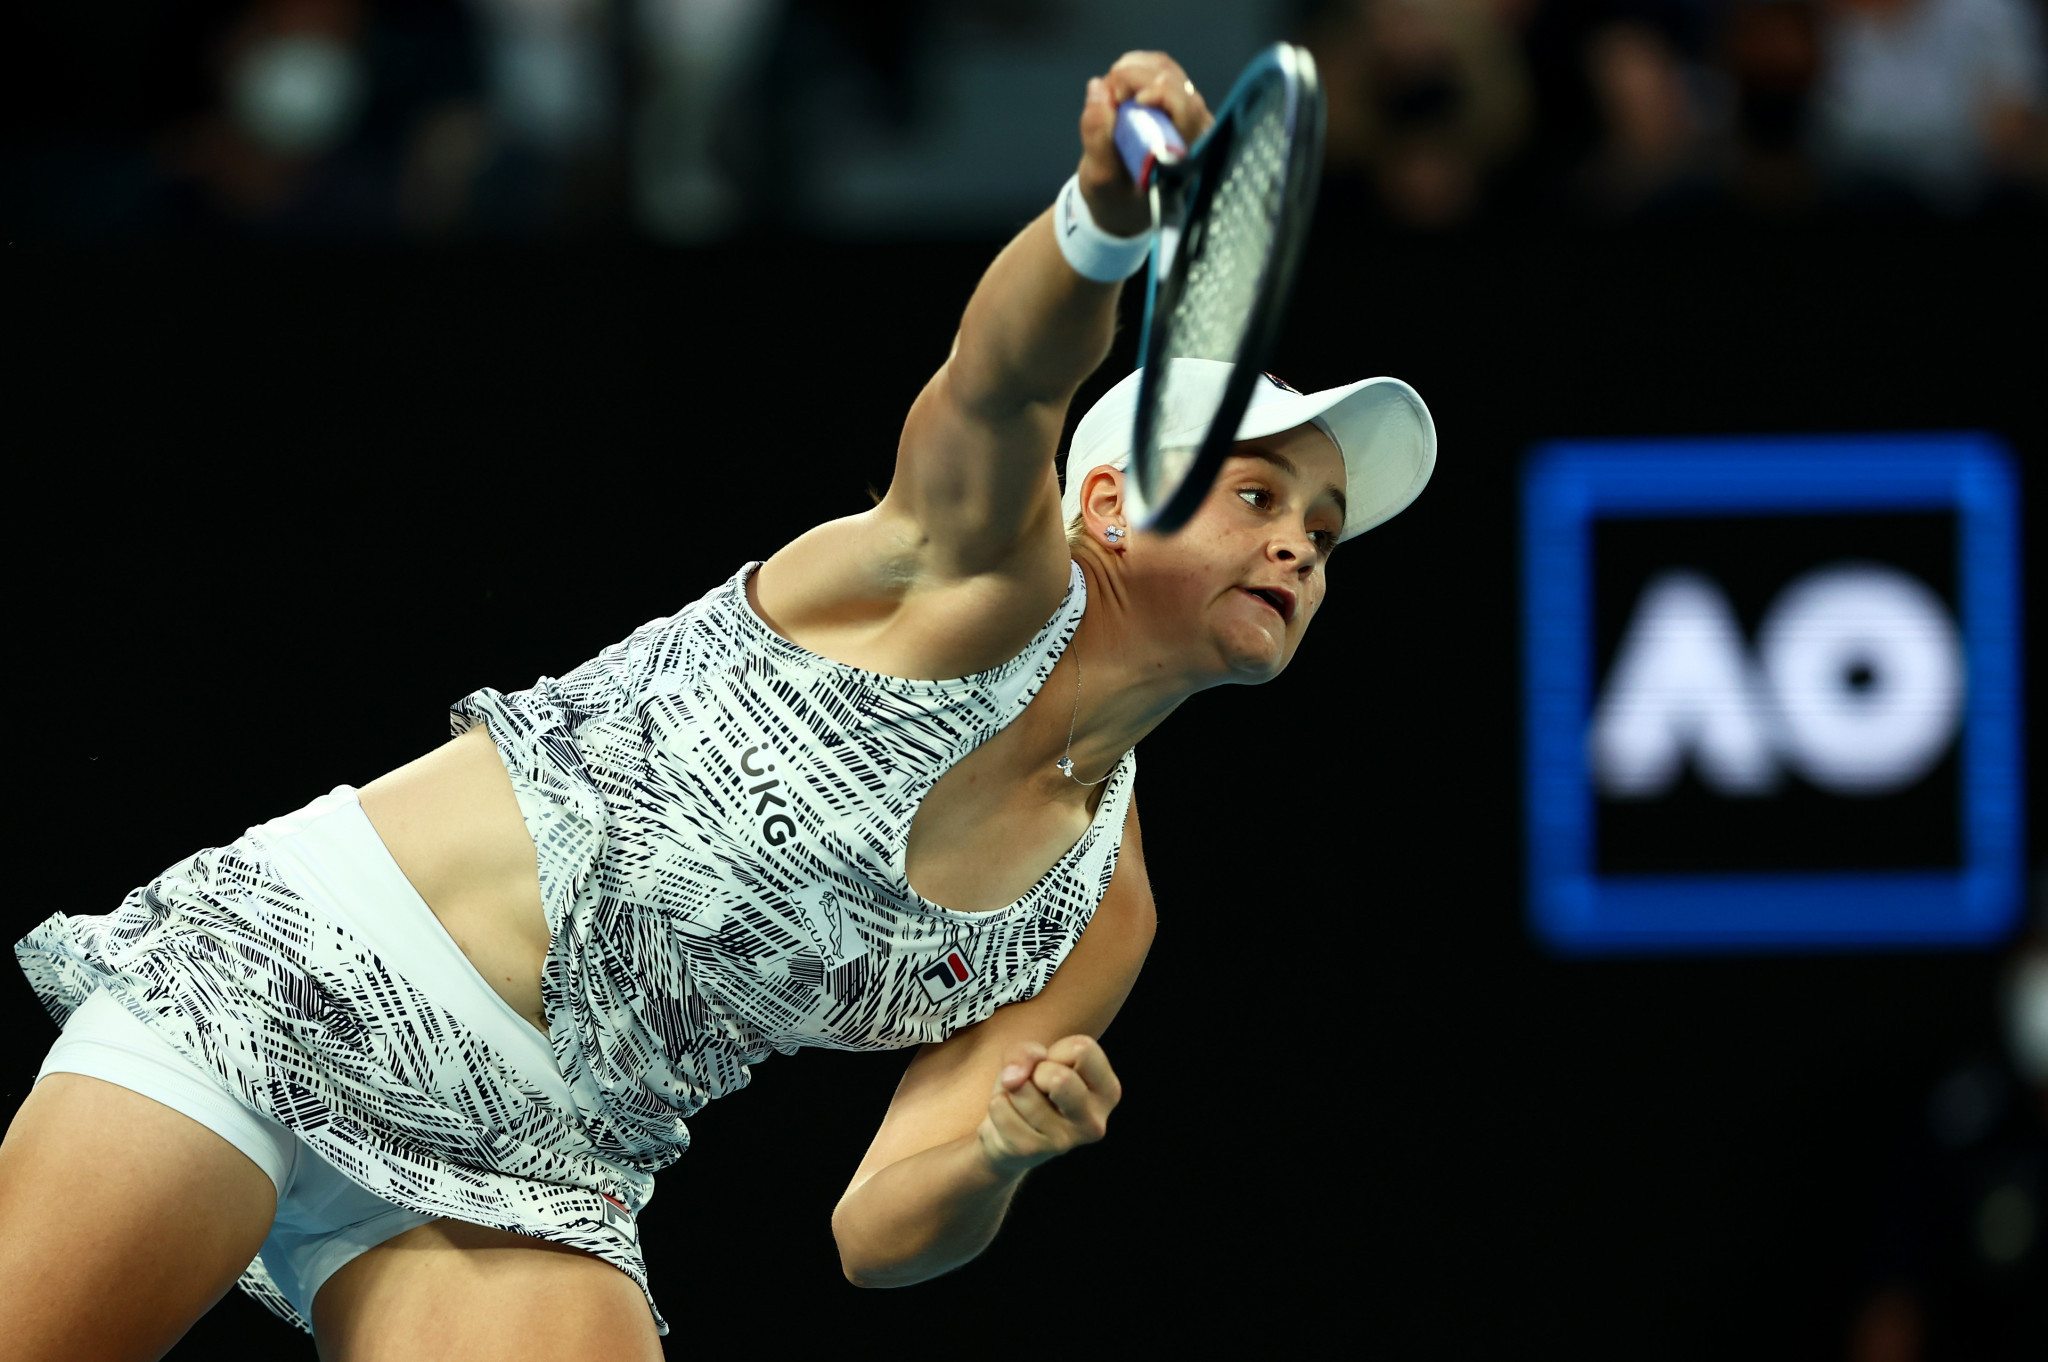 Barty's serve has been a big factor in enabling the Australian to win the title without dropping a set ©Getty Images